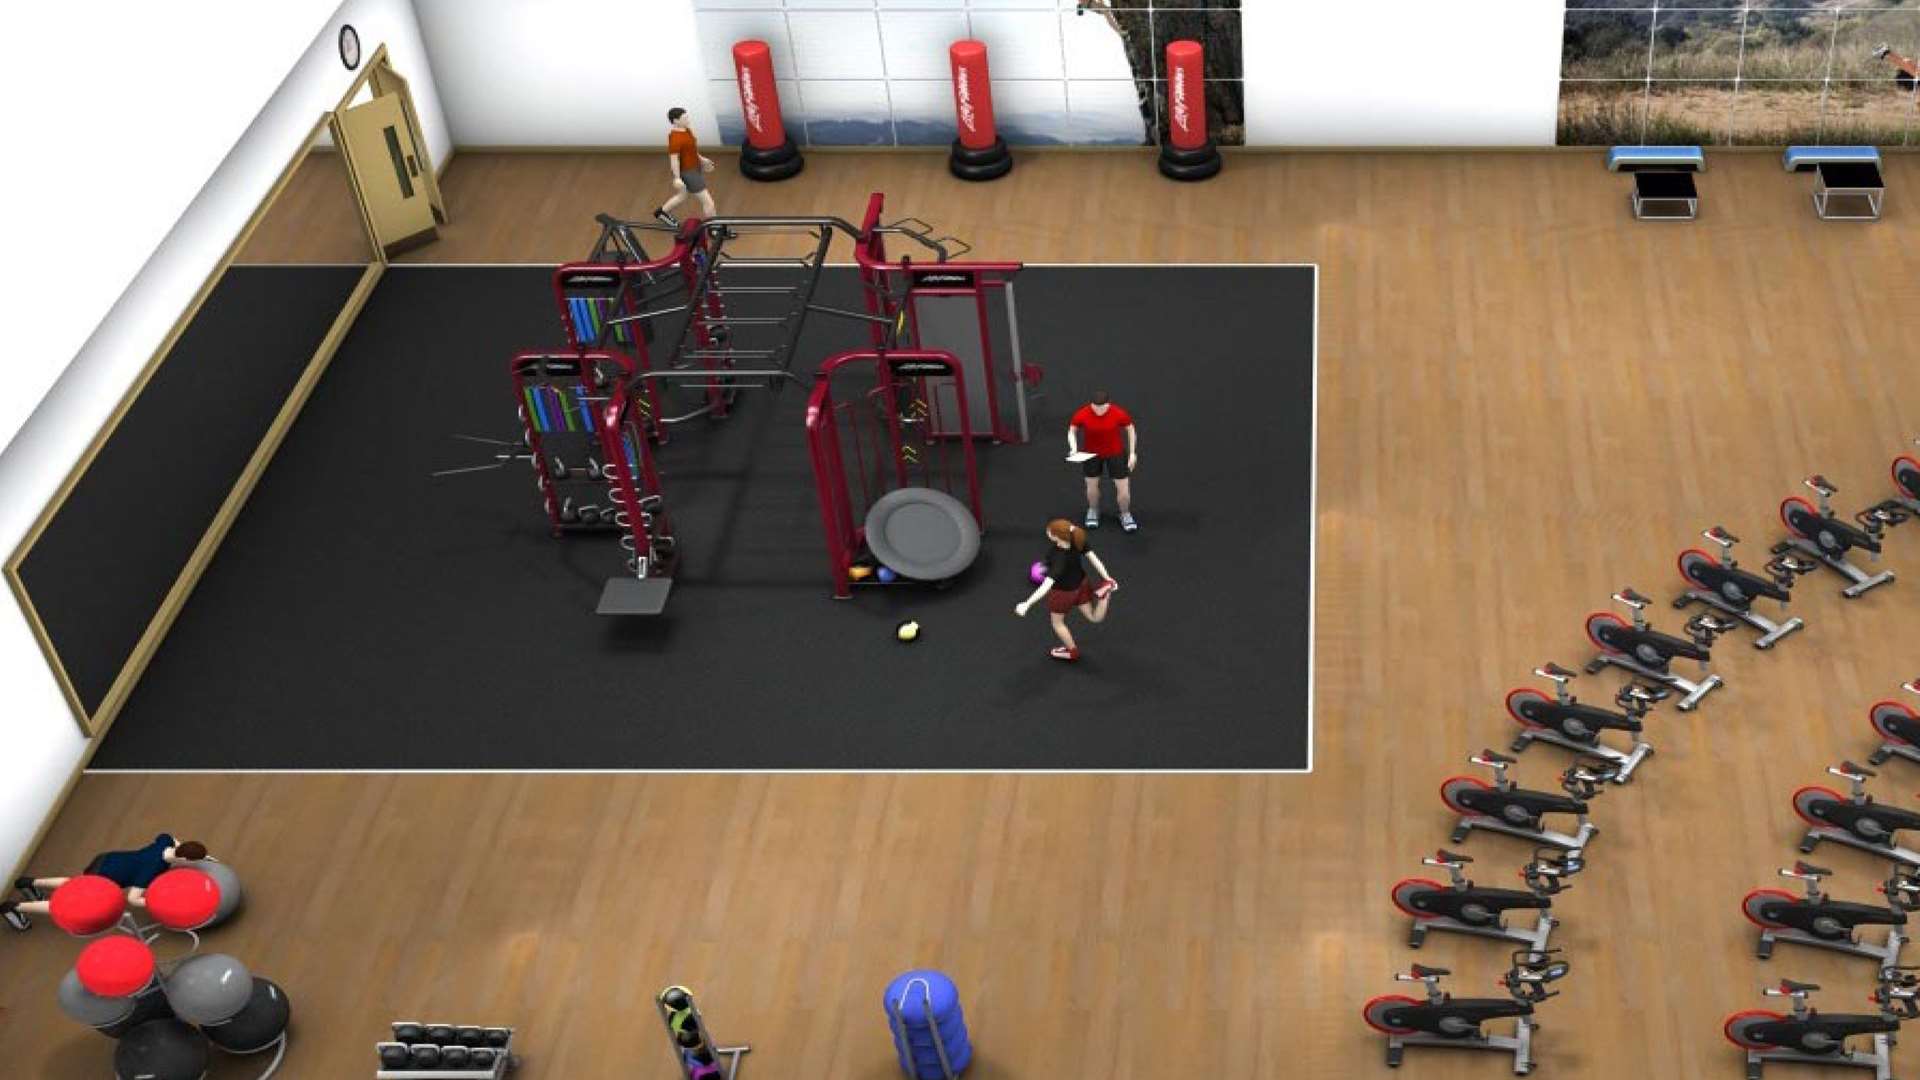 An artist's impression of how the inside of the gym will look once in operation